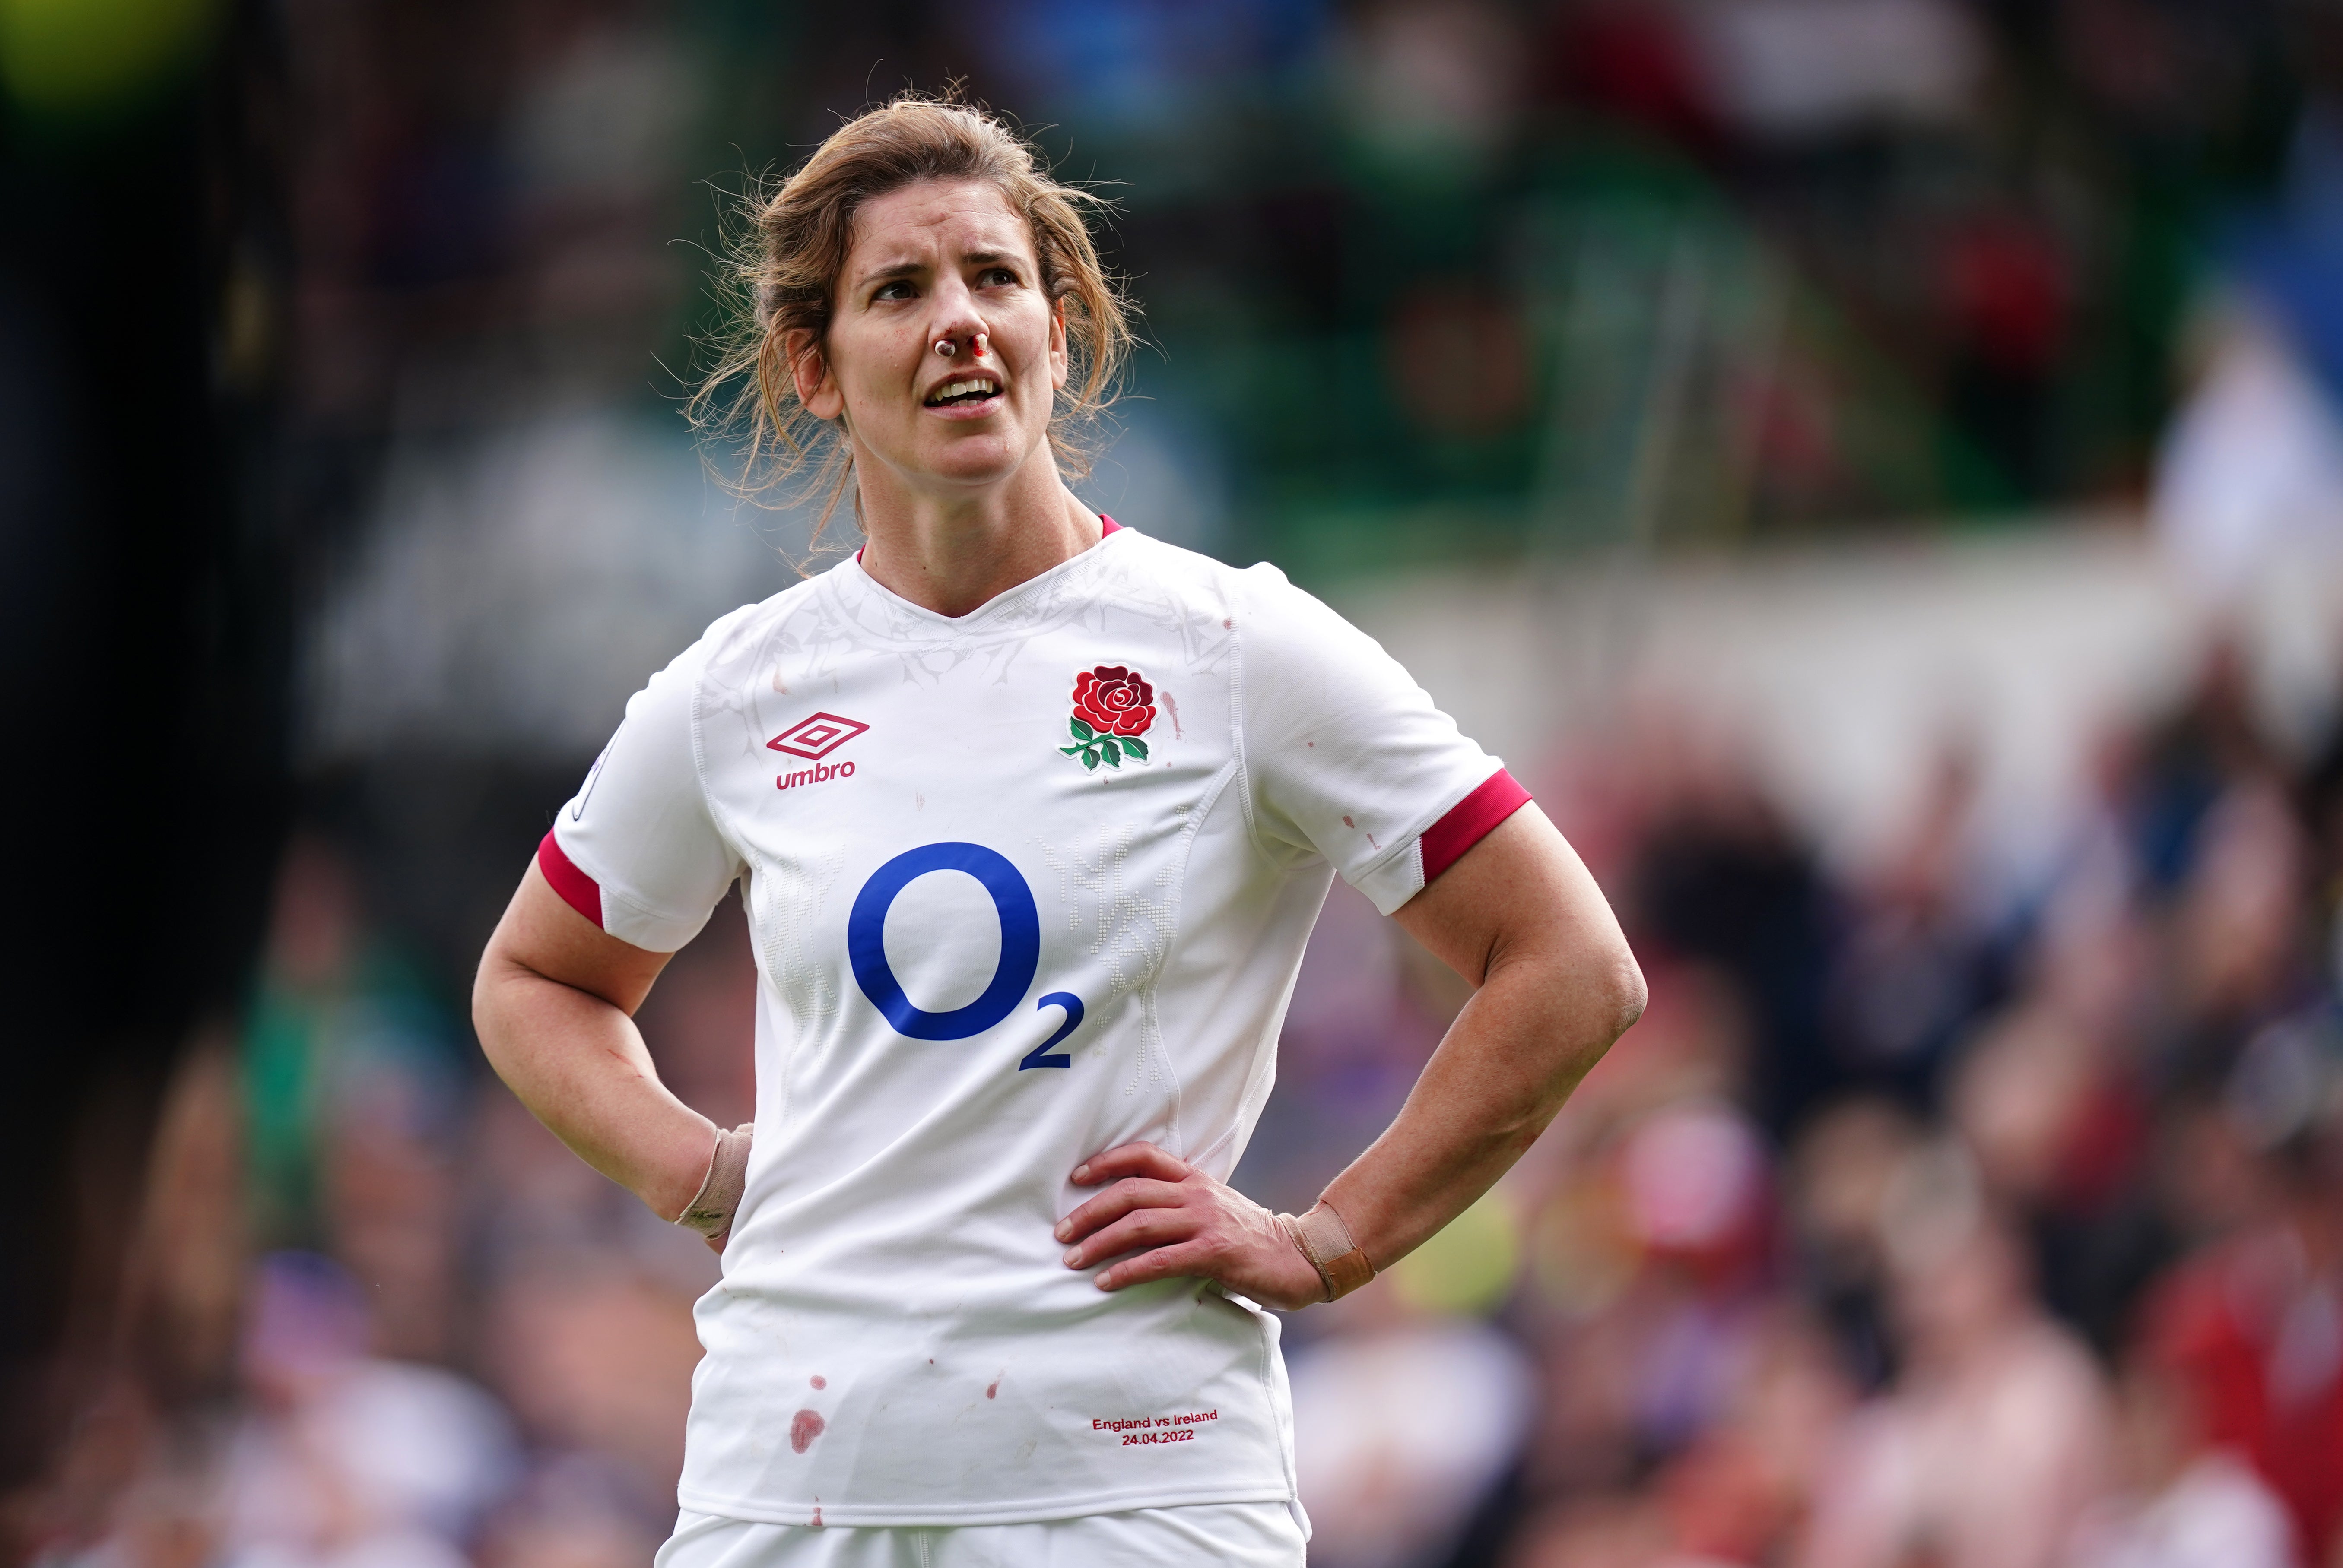 Hunter is the second most capped player in England history